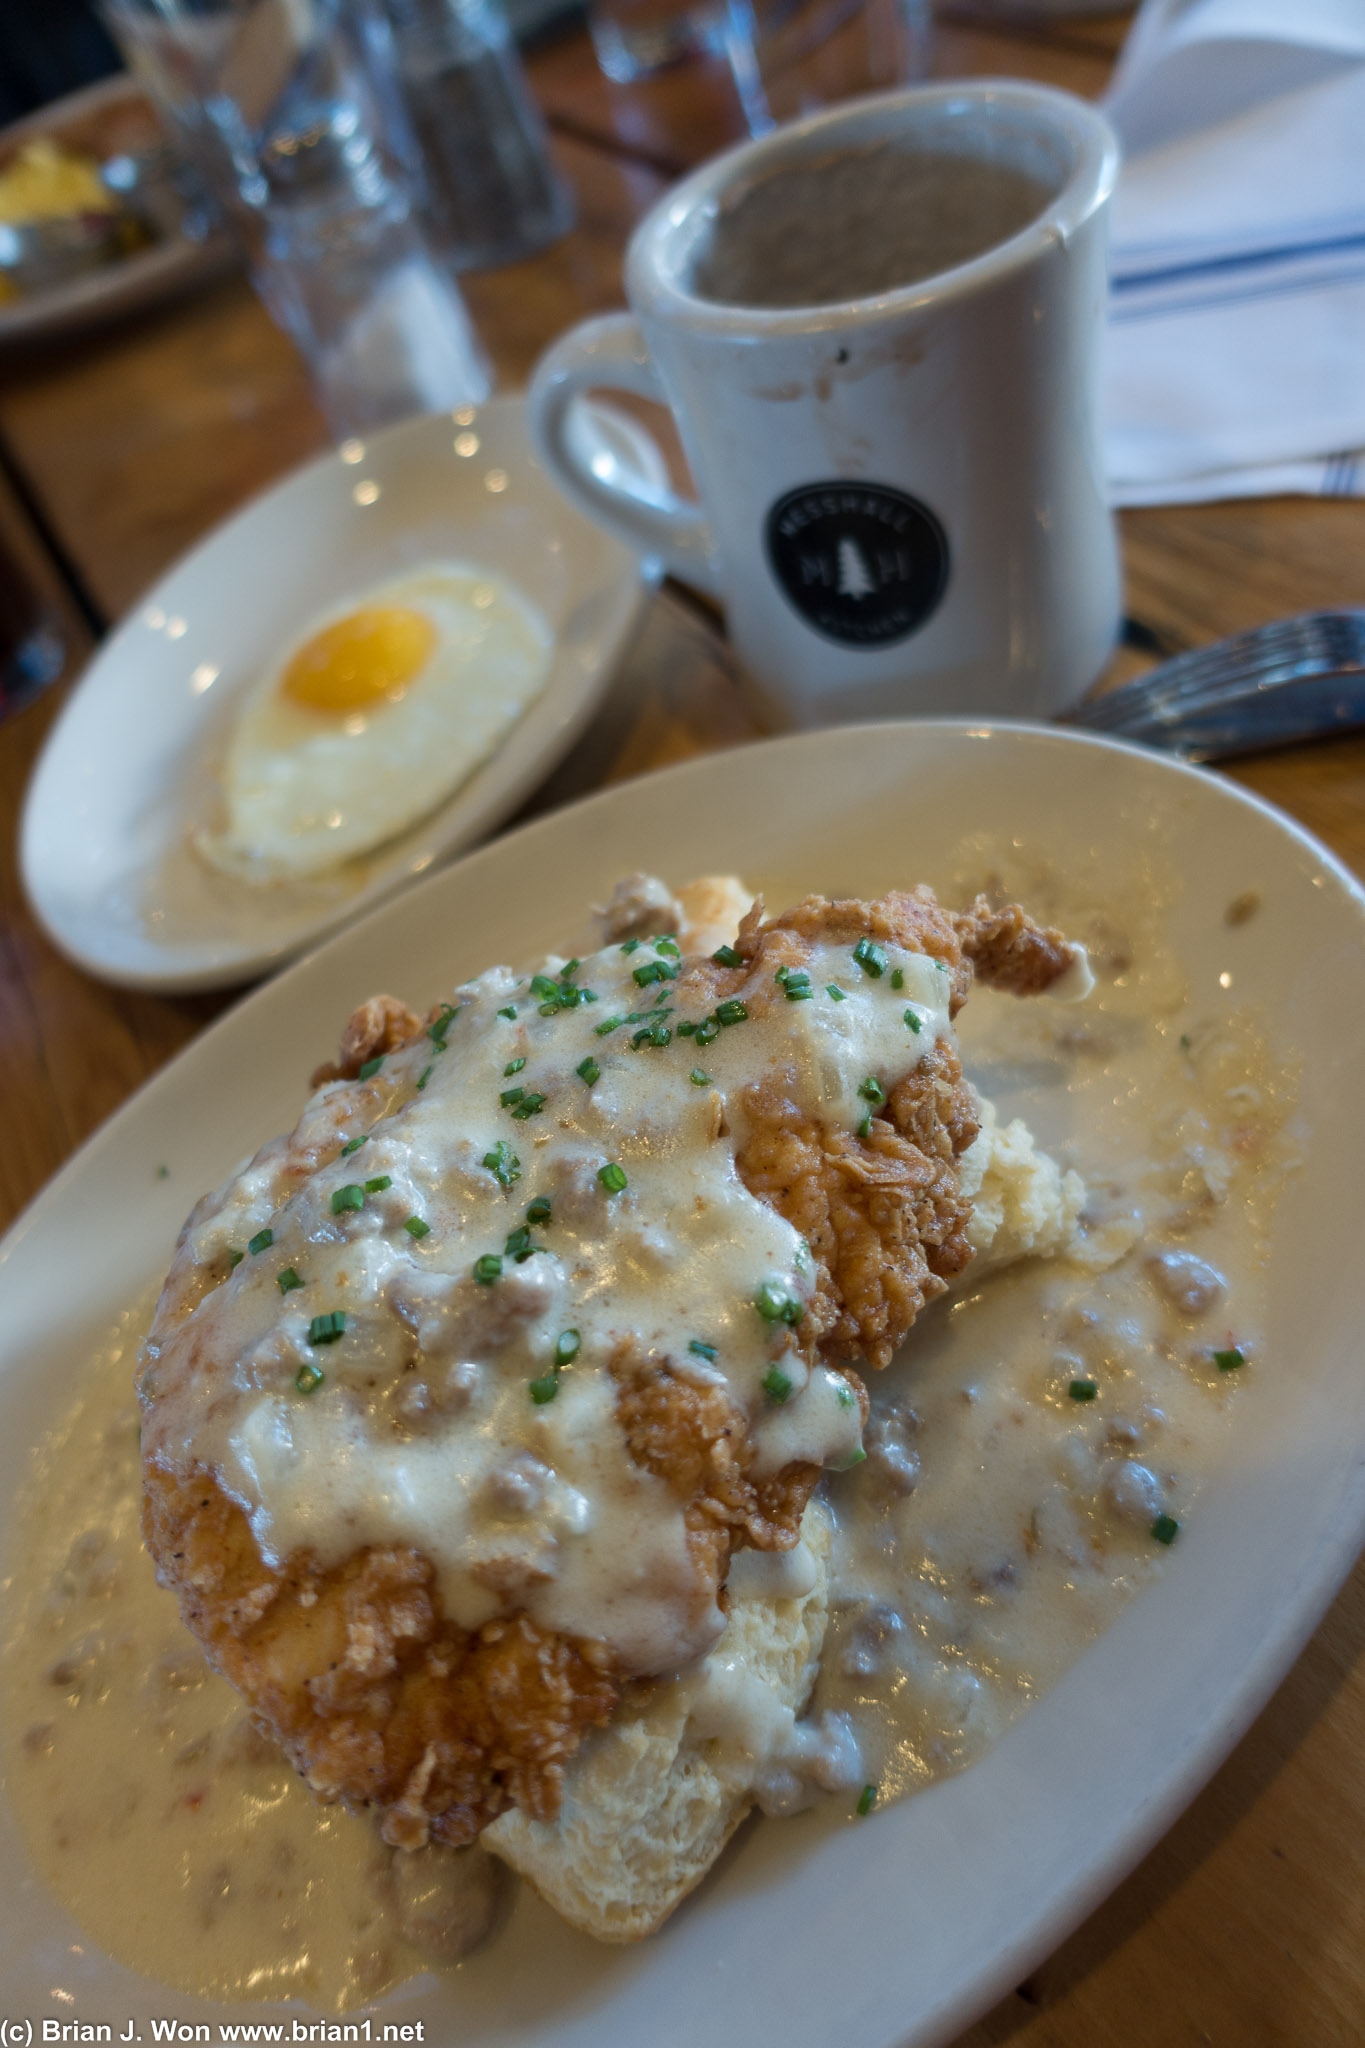 Chicken and biscuits, with an egg and some hot chocolate.